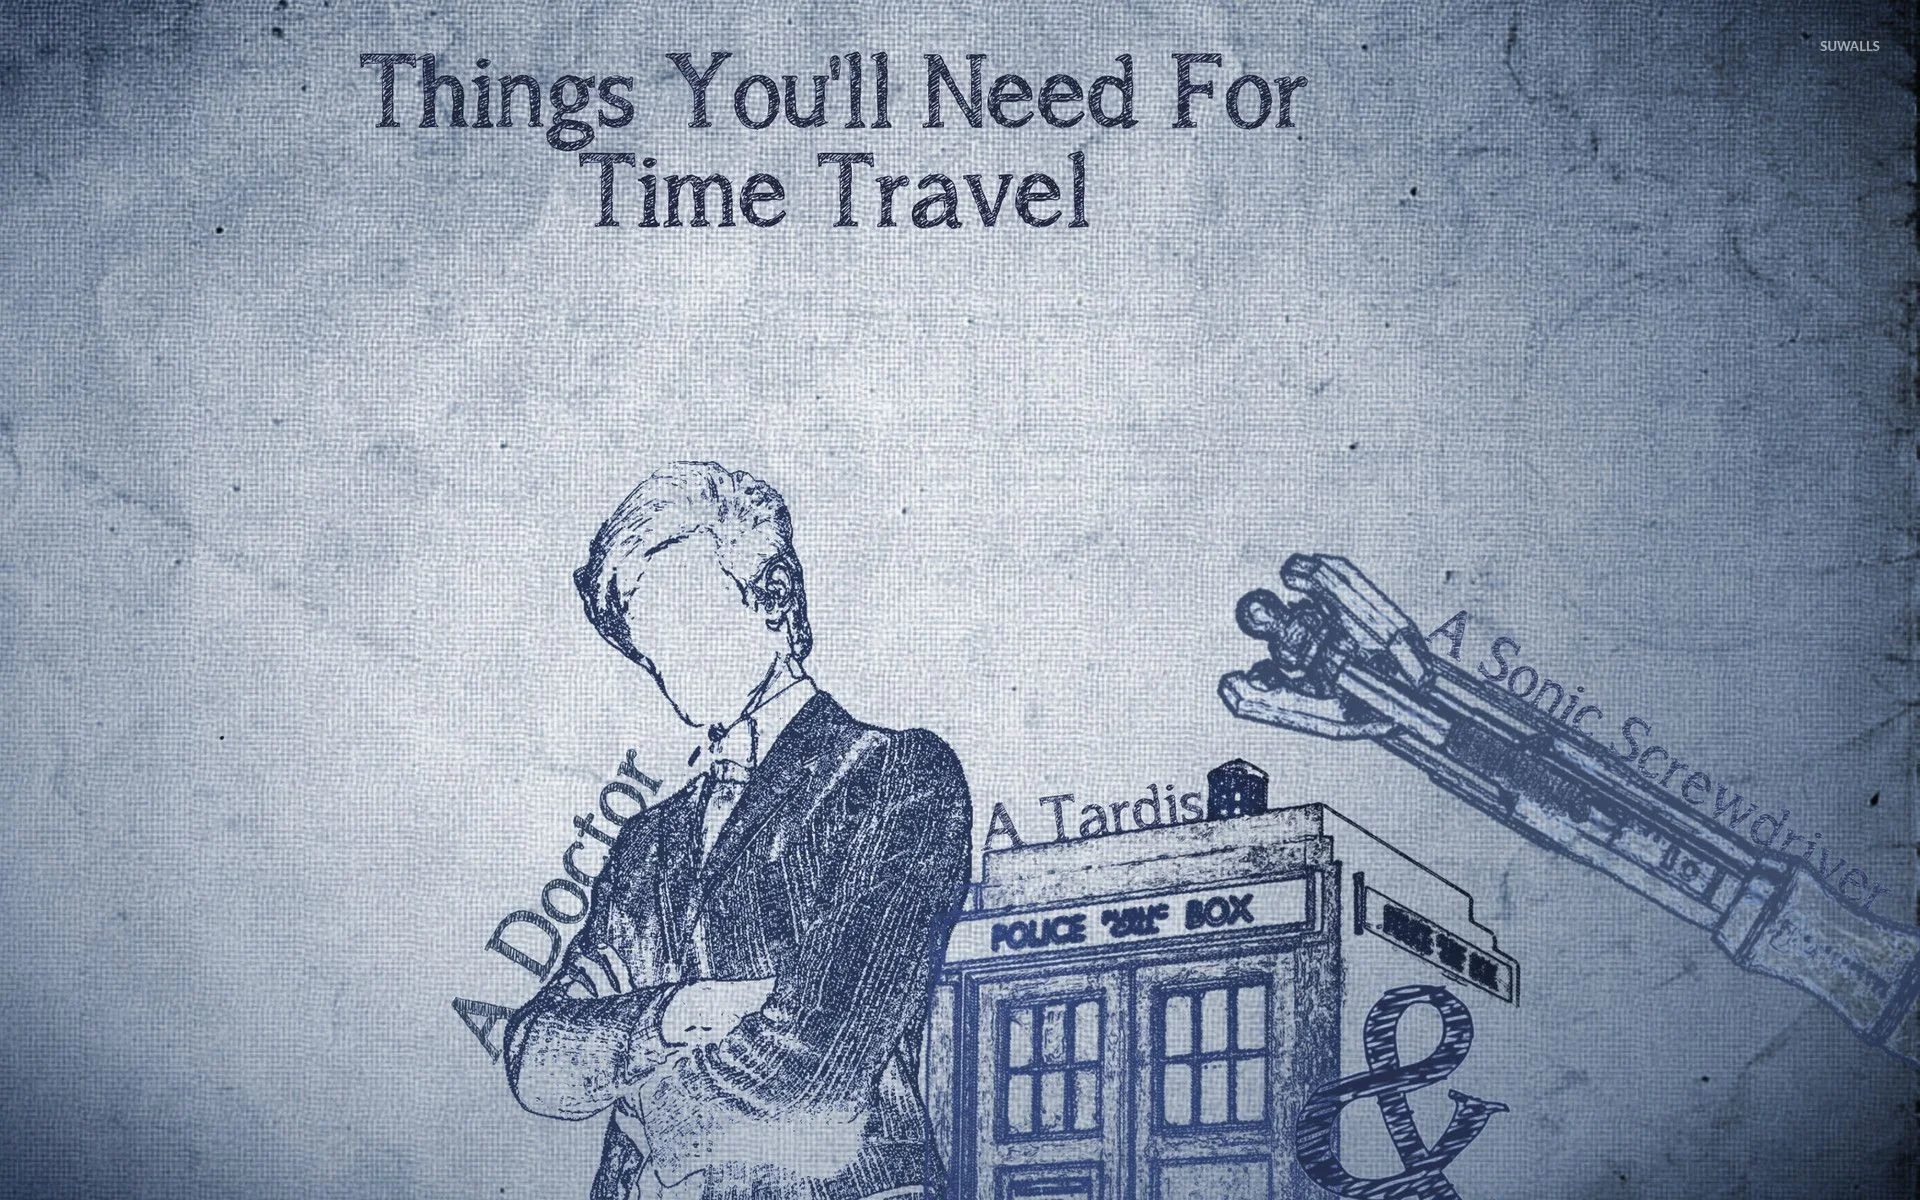 Things you need for time travel wallpaper